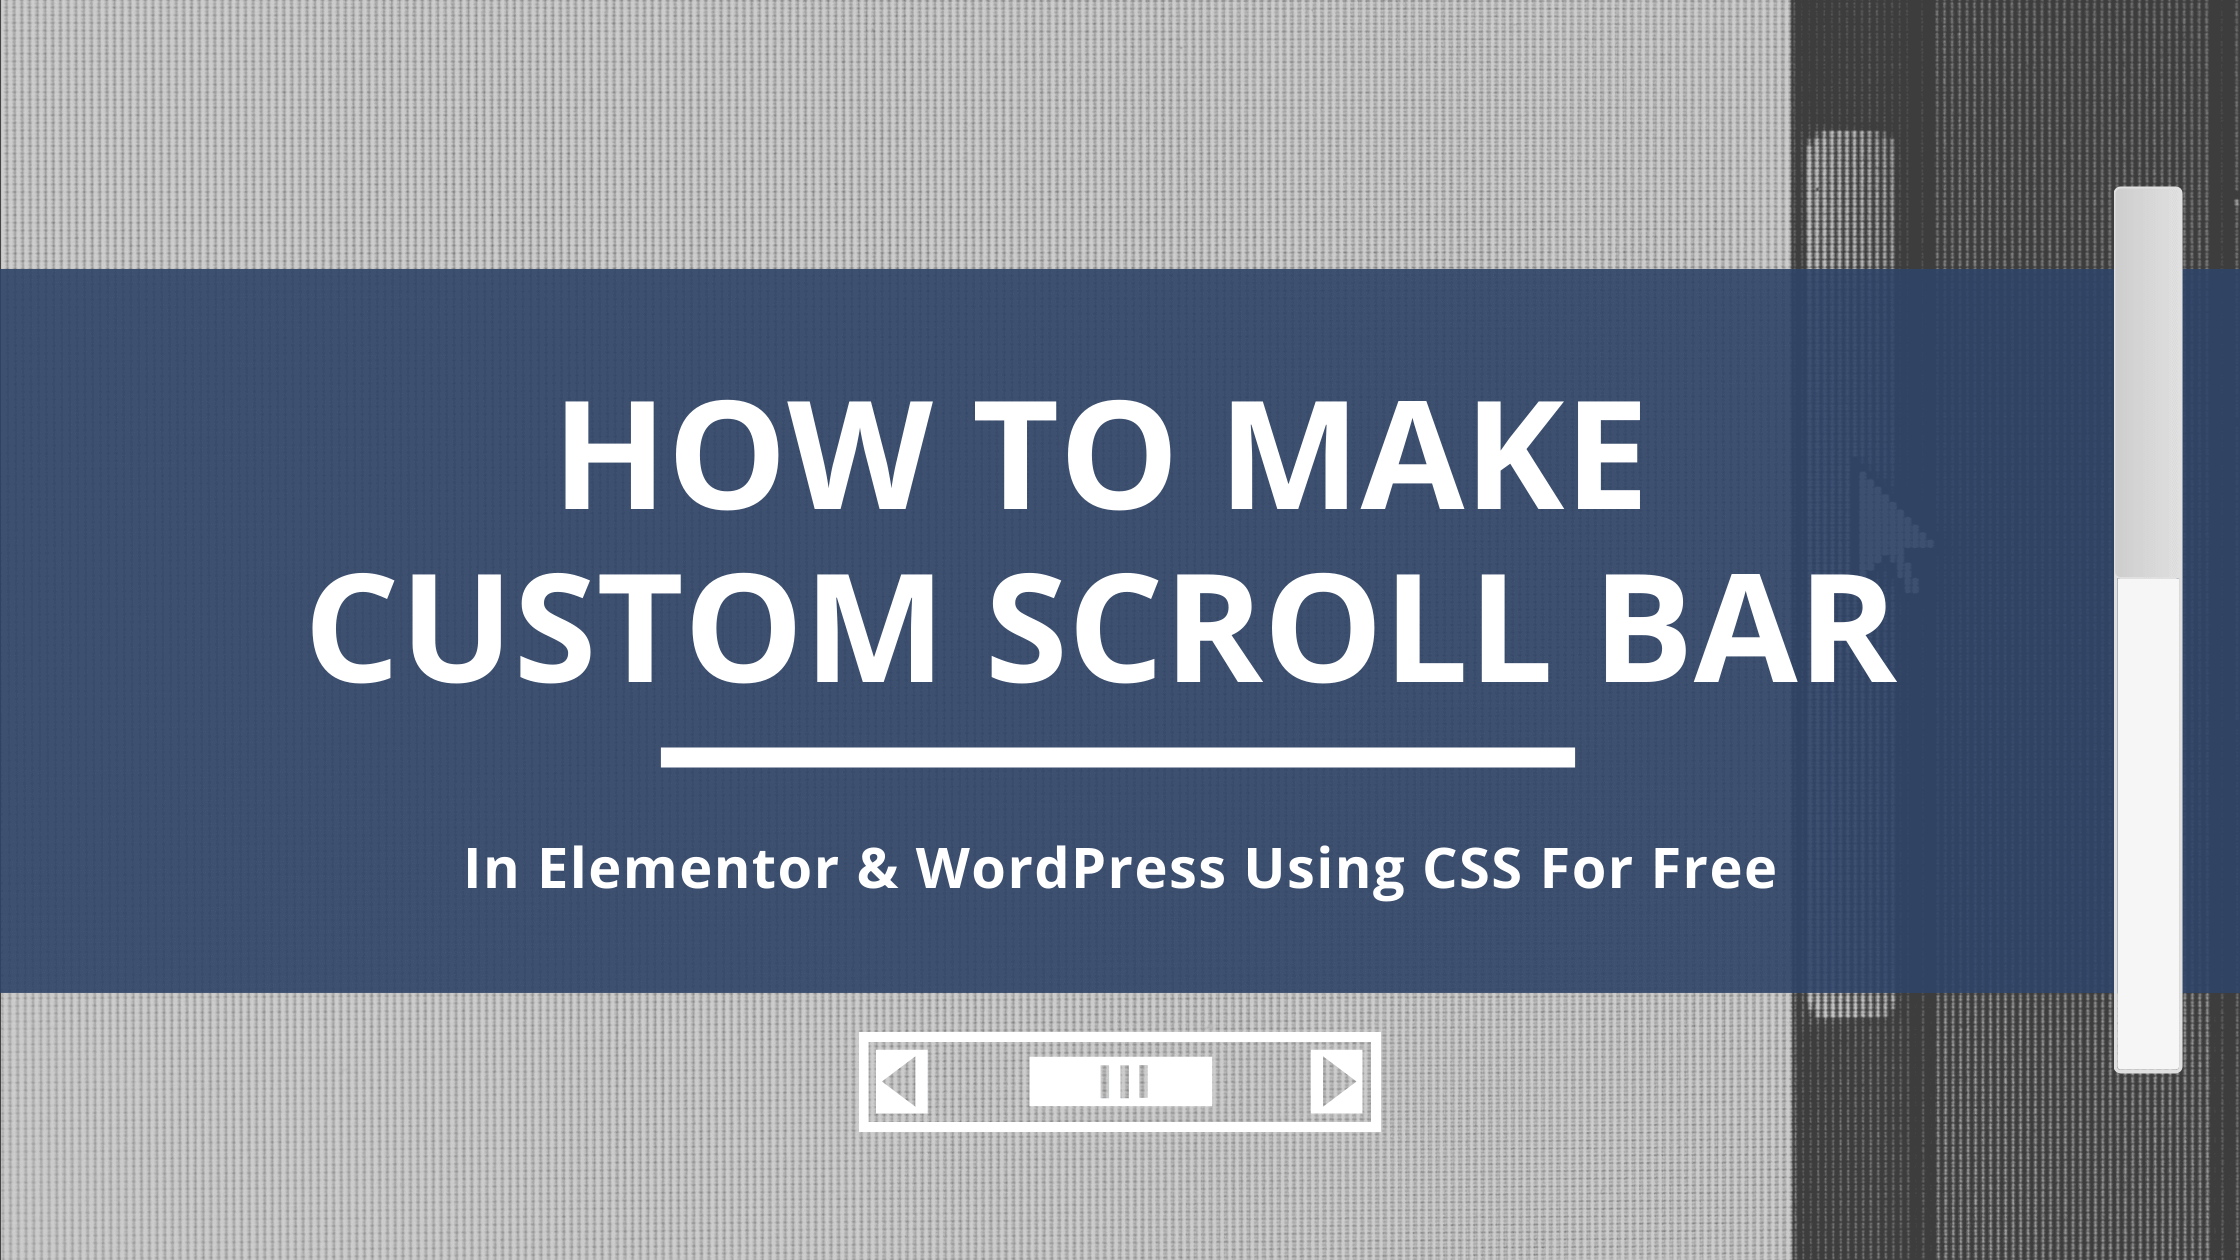 How To Make Custom Scroll Bar In Elementor And WordPress For Free